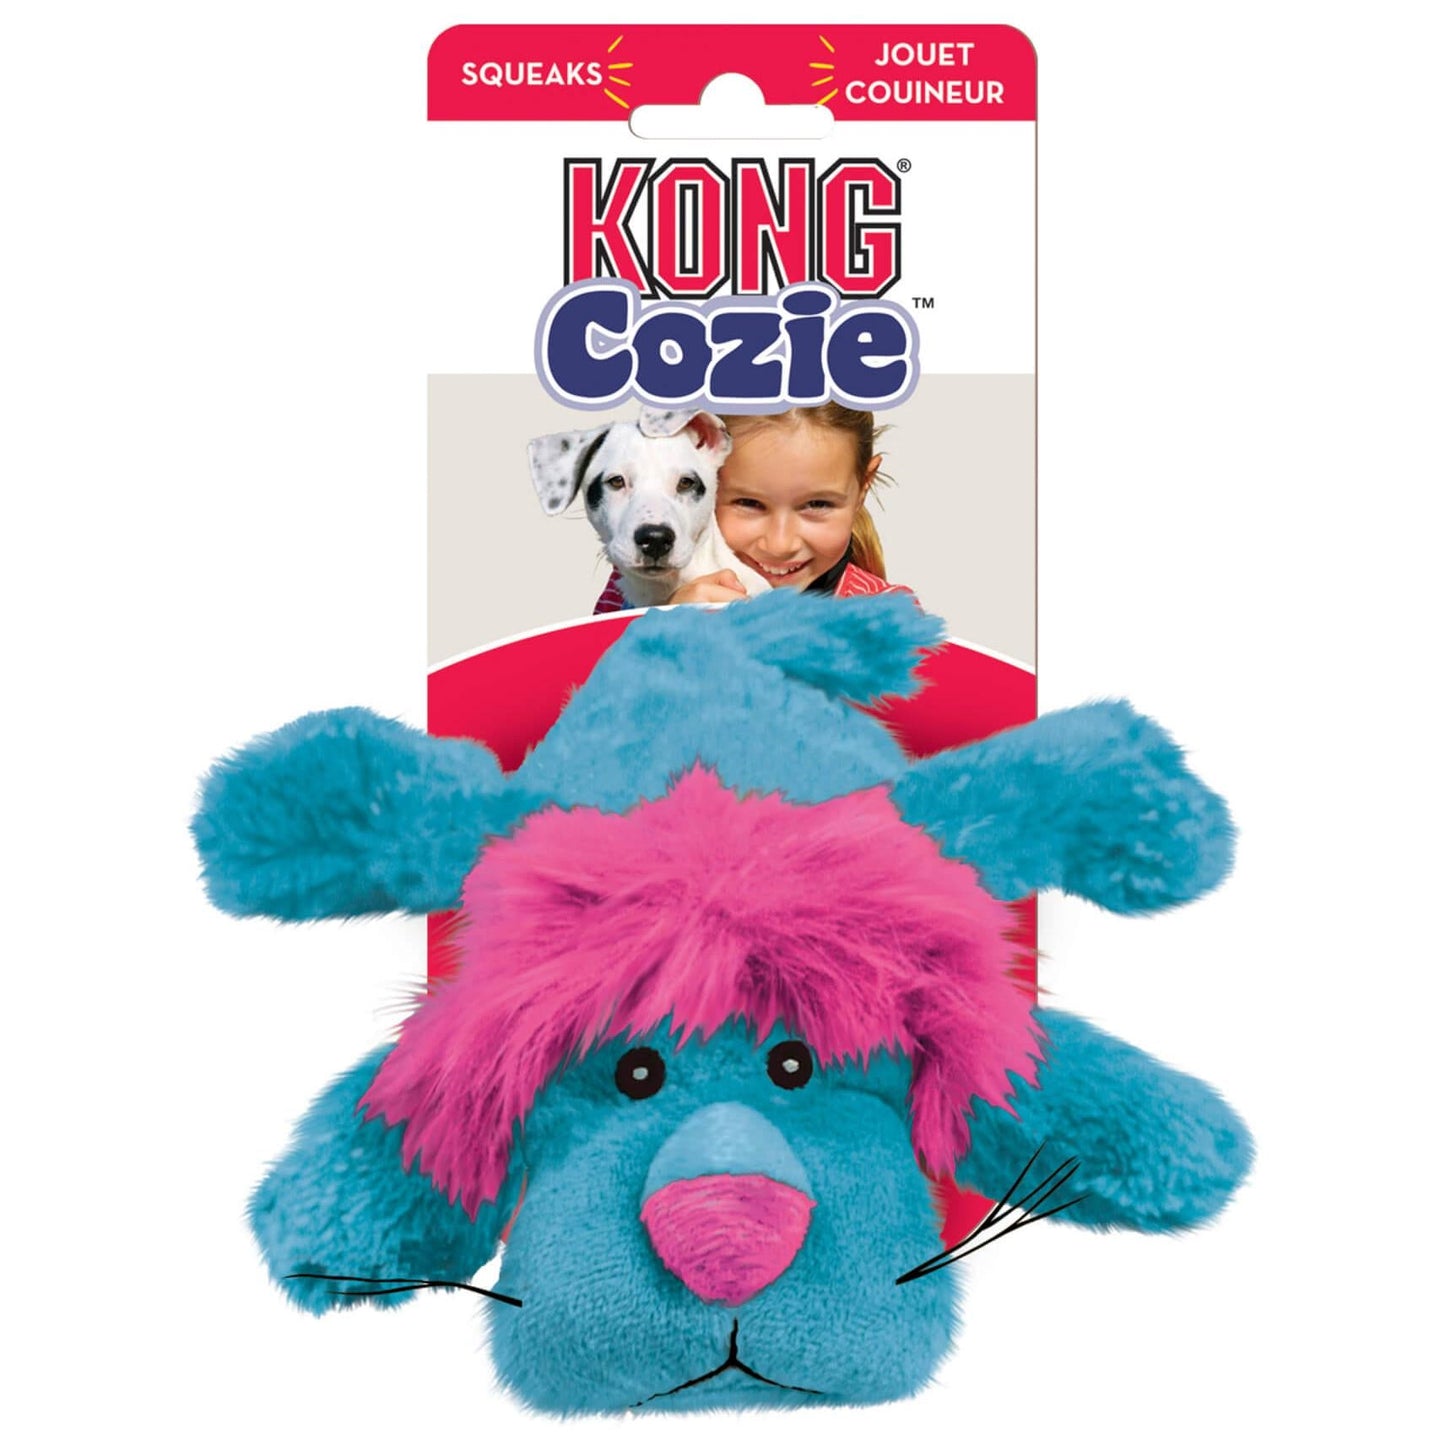 KONG Cozie King Lion Dog Toy